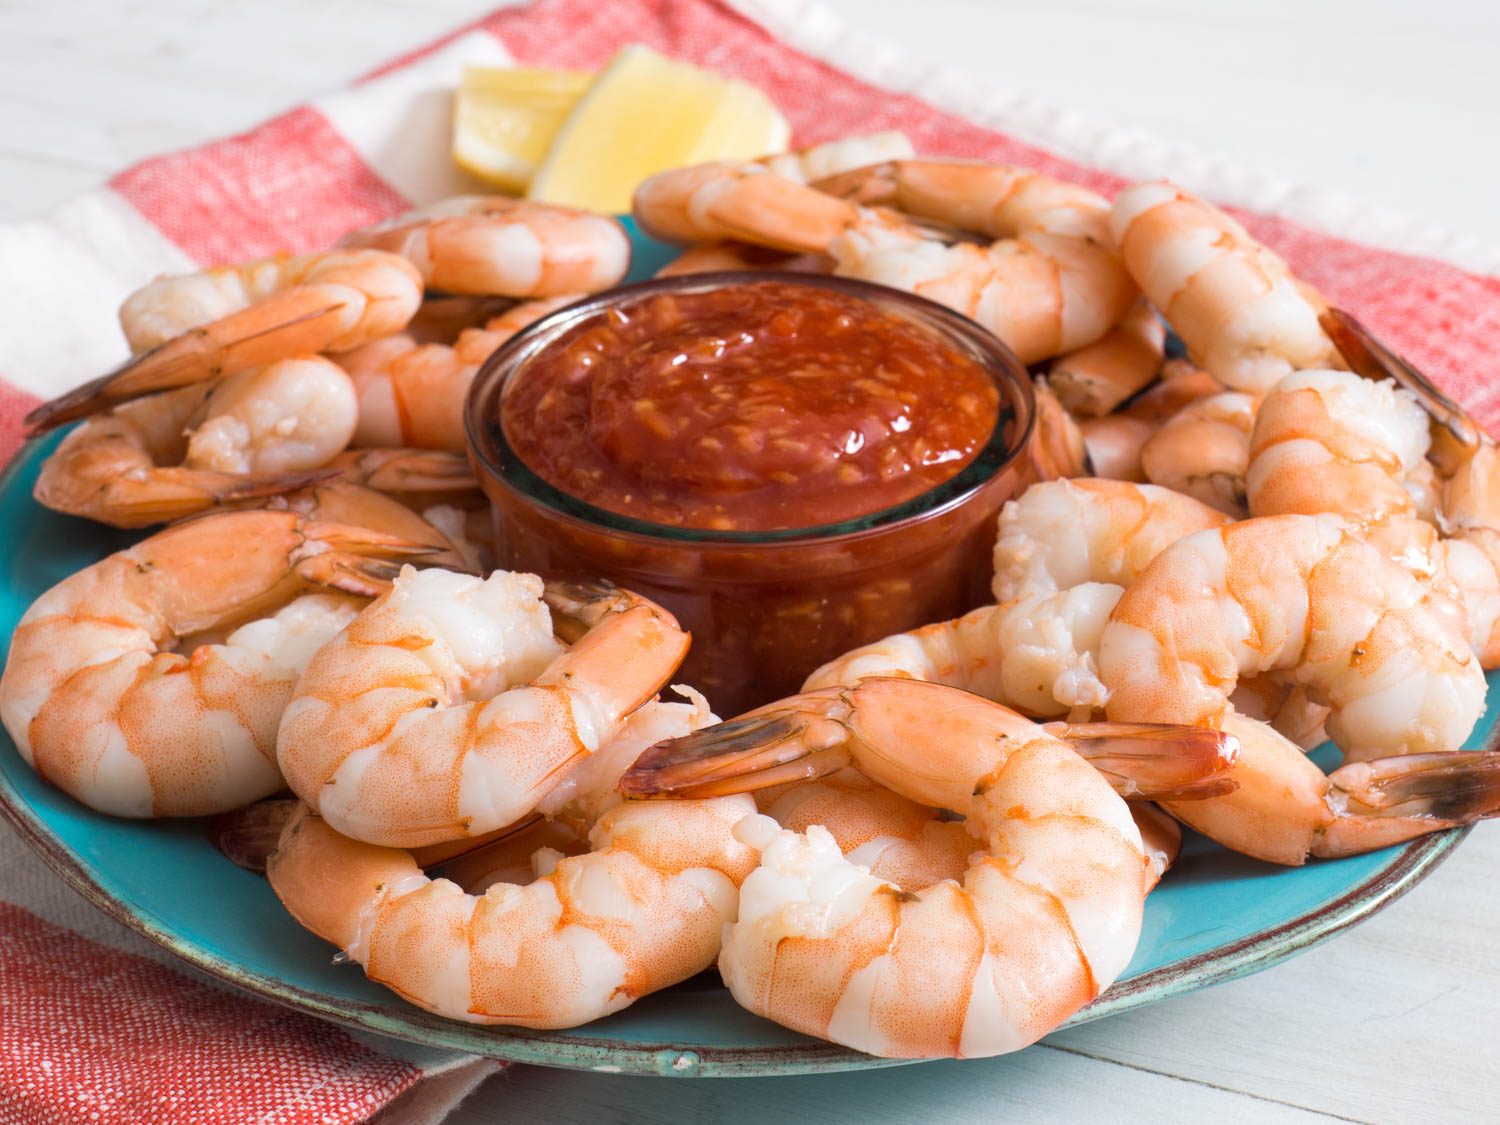 This Food Test Will Reveal If You’re an 😄 Optimist or a 😟 Pessimist shrimp cocktail